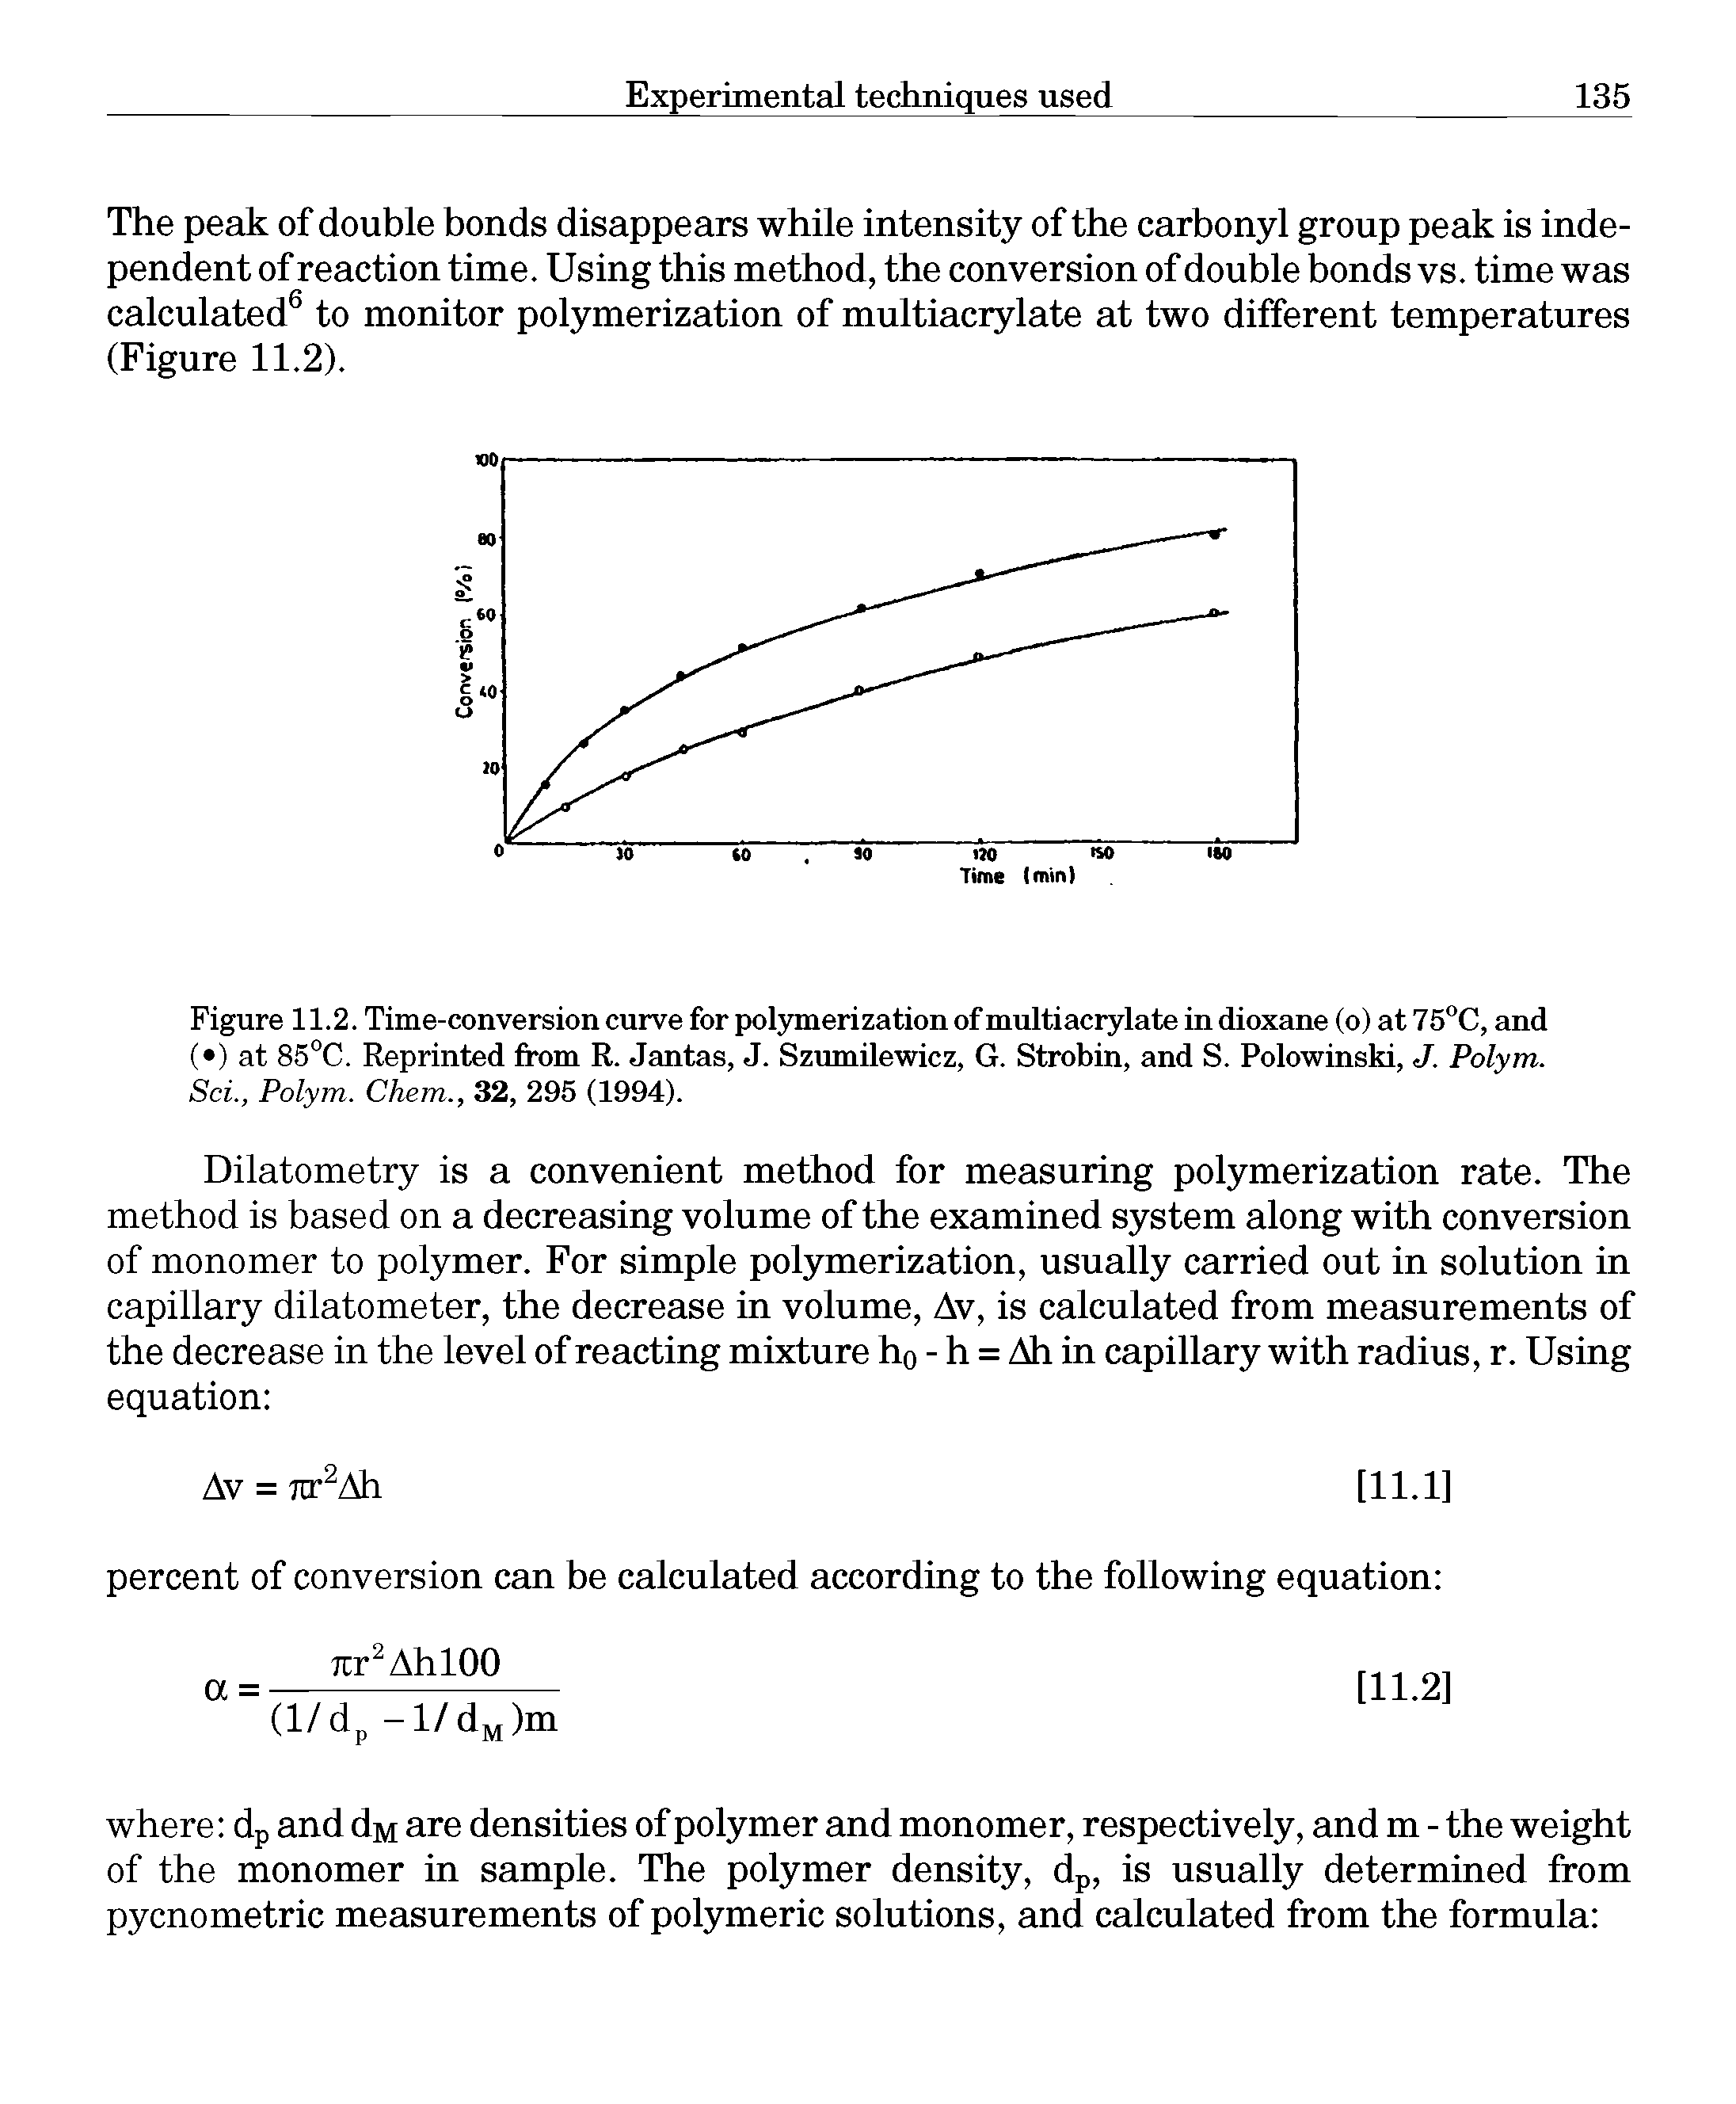 Figure 11.2. Time-conversion curve for polymerization of multiacrylate in dioxane (o) at 75°C, and ( ) at 85°C. Reprinted from R. Jantas, J. Szumilewicz, G. Strobin, and S. Polowinski, J. Polym.